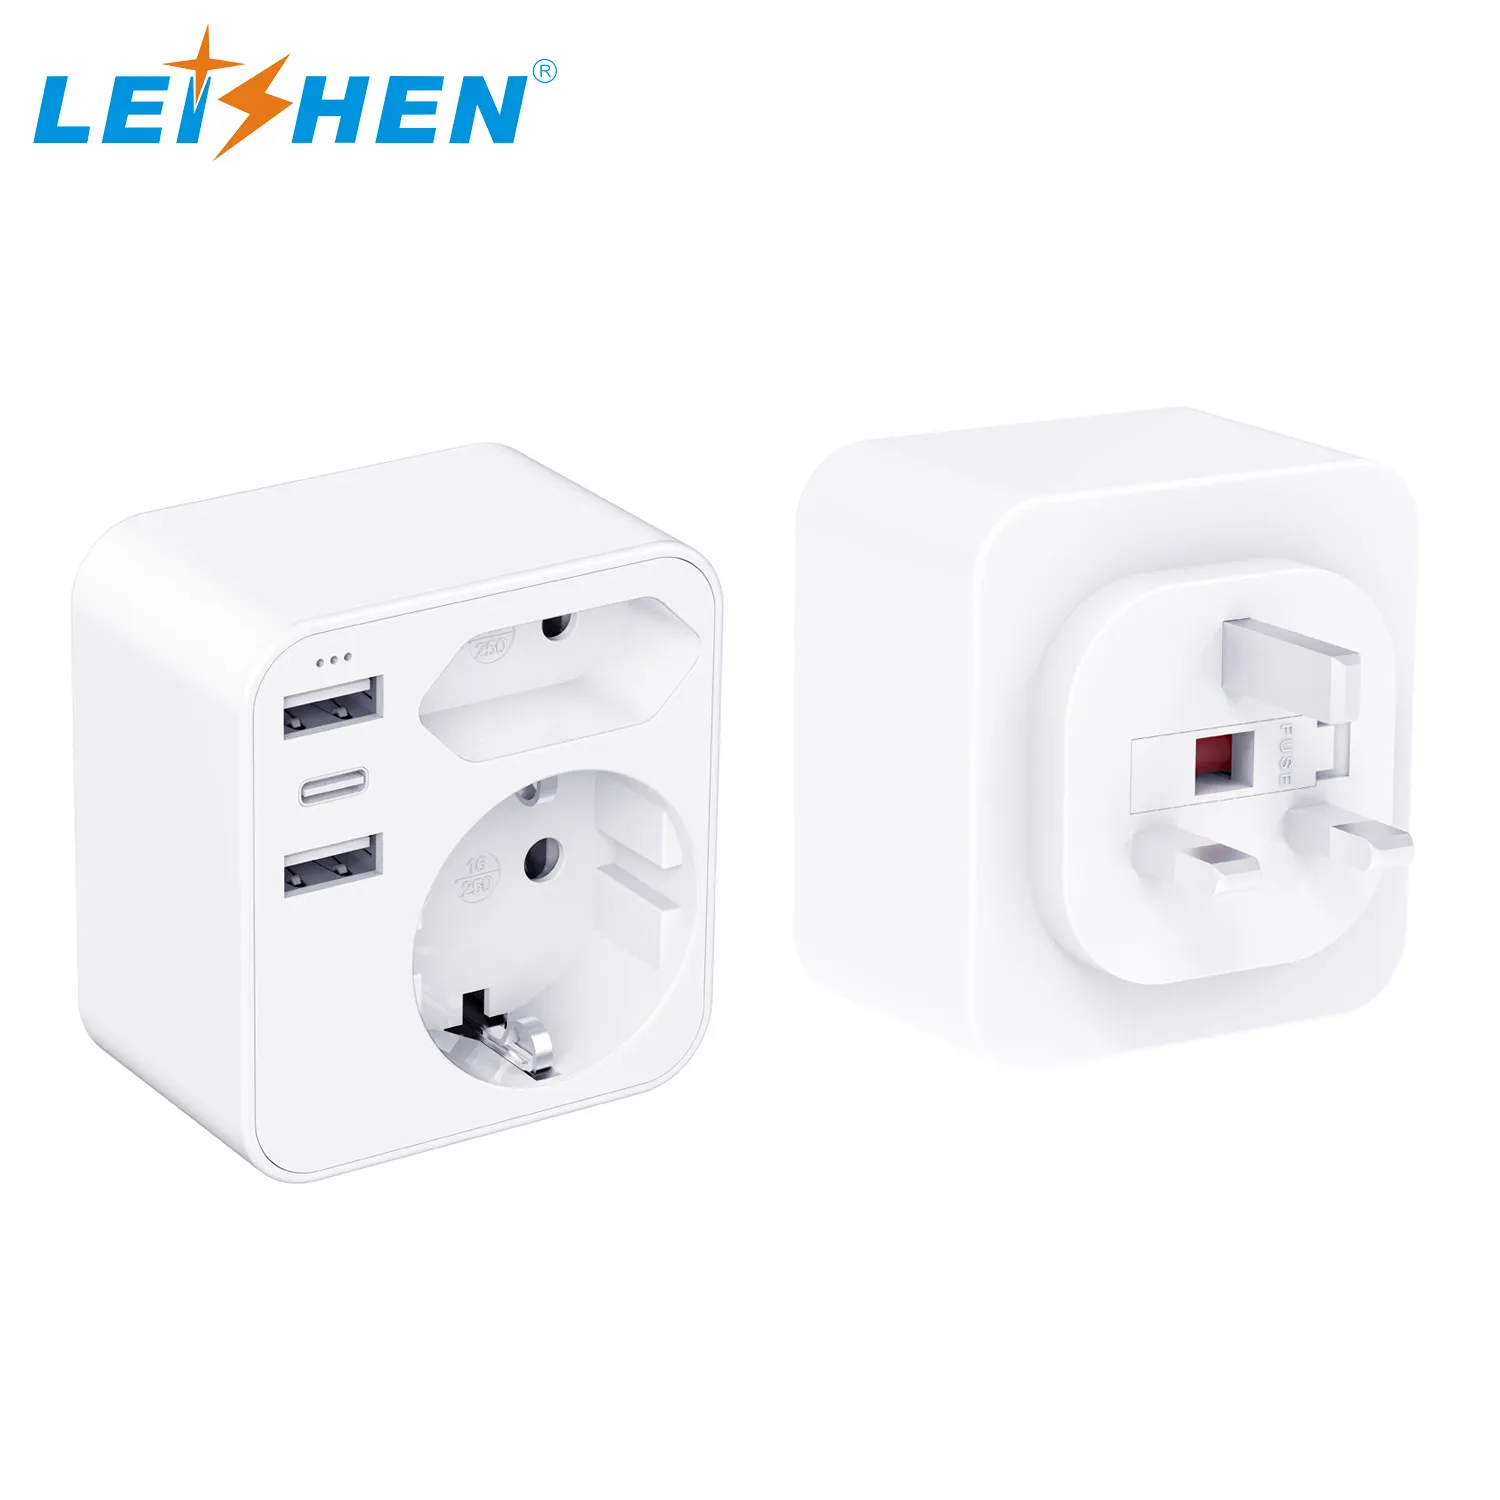 Amazon New Product EU Schuko 2 Pin To 3 Pin Travel Adaptors 13A Fuse 2 * 16A/10A Schuko German AC Outlets